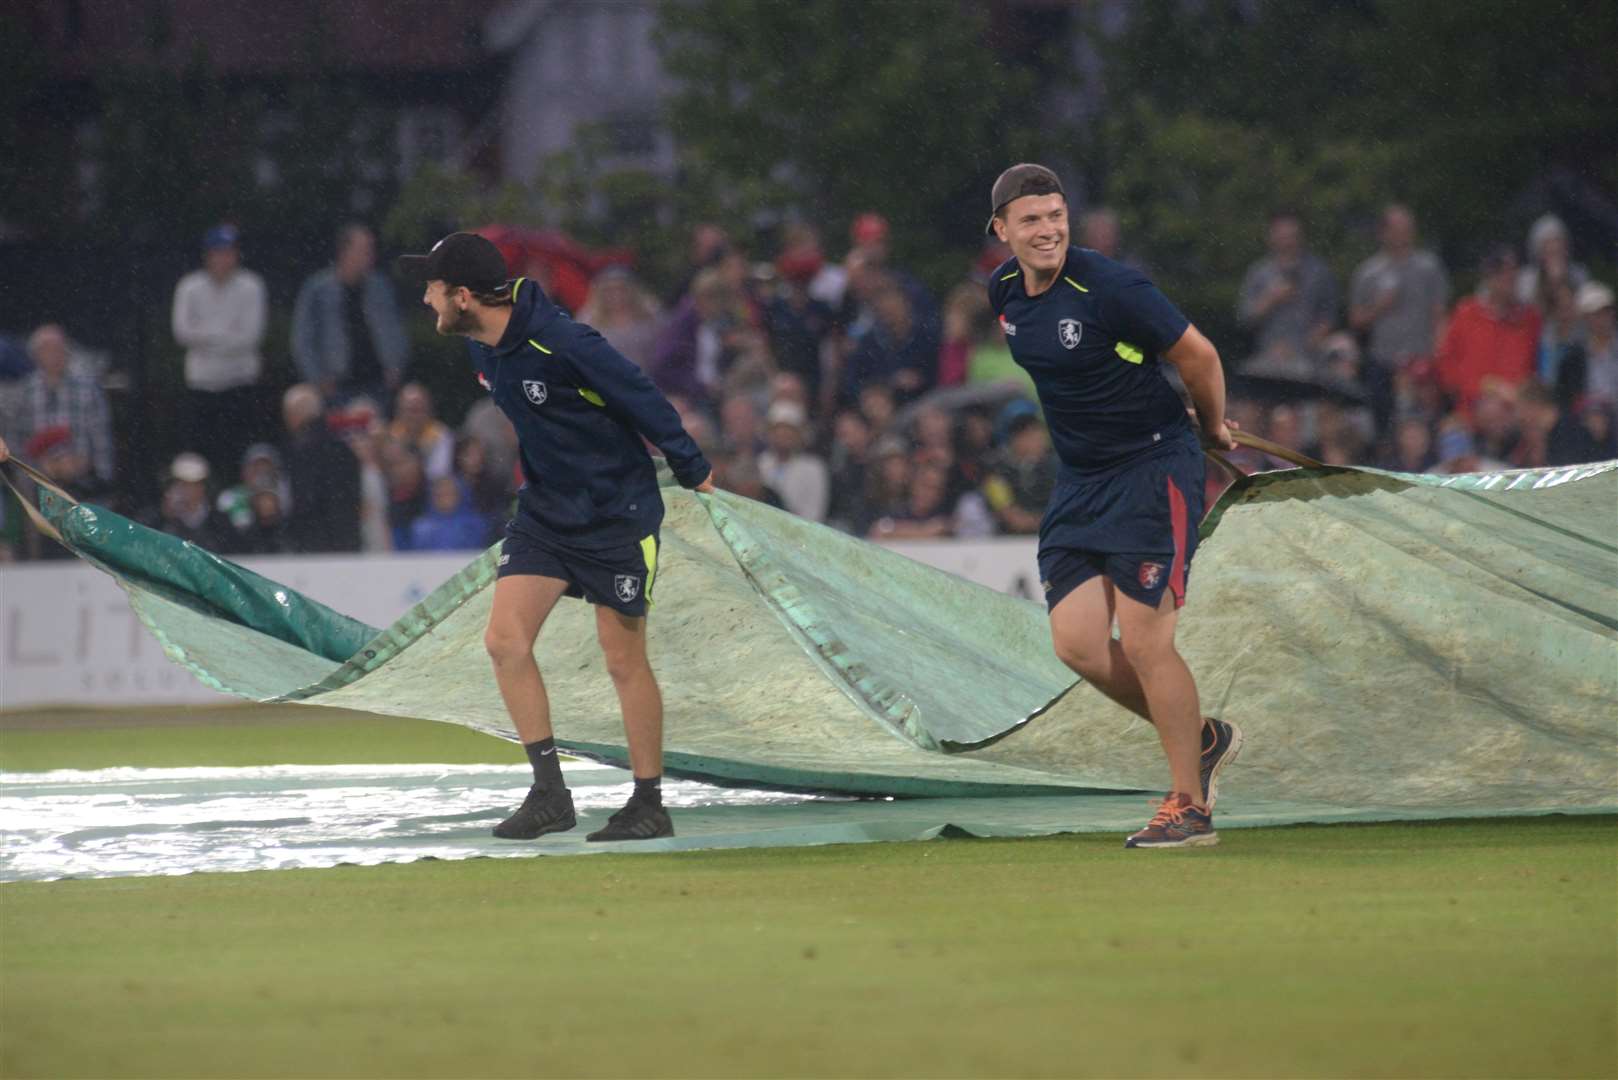 The covers come on ending Kent's T20 match with Surrey. Picture: Chris Davey